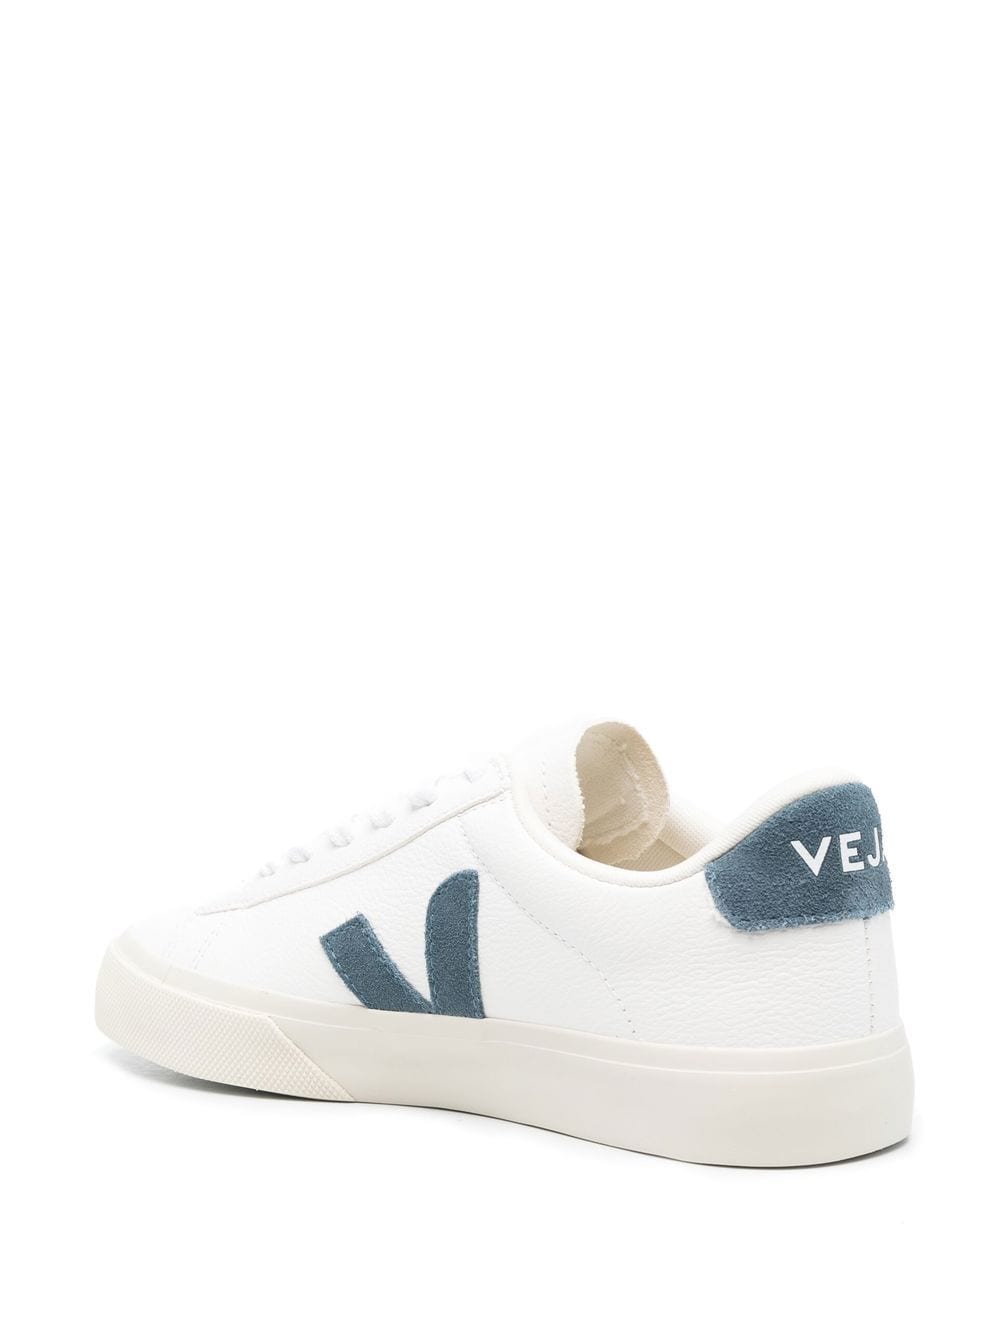 Campo low-top sneakers<BR/><BR/><BR/>